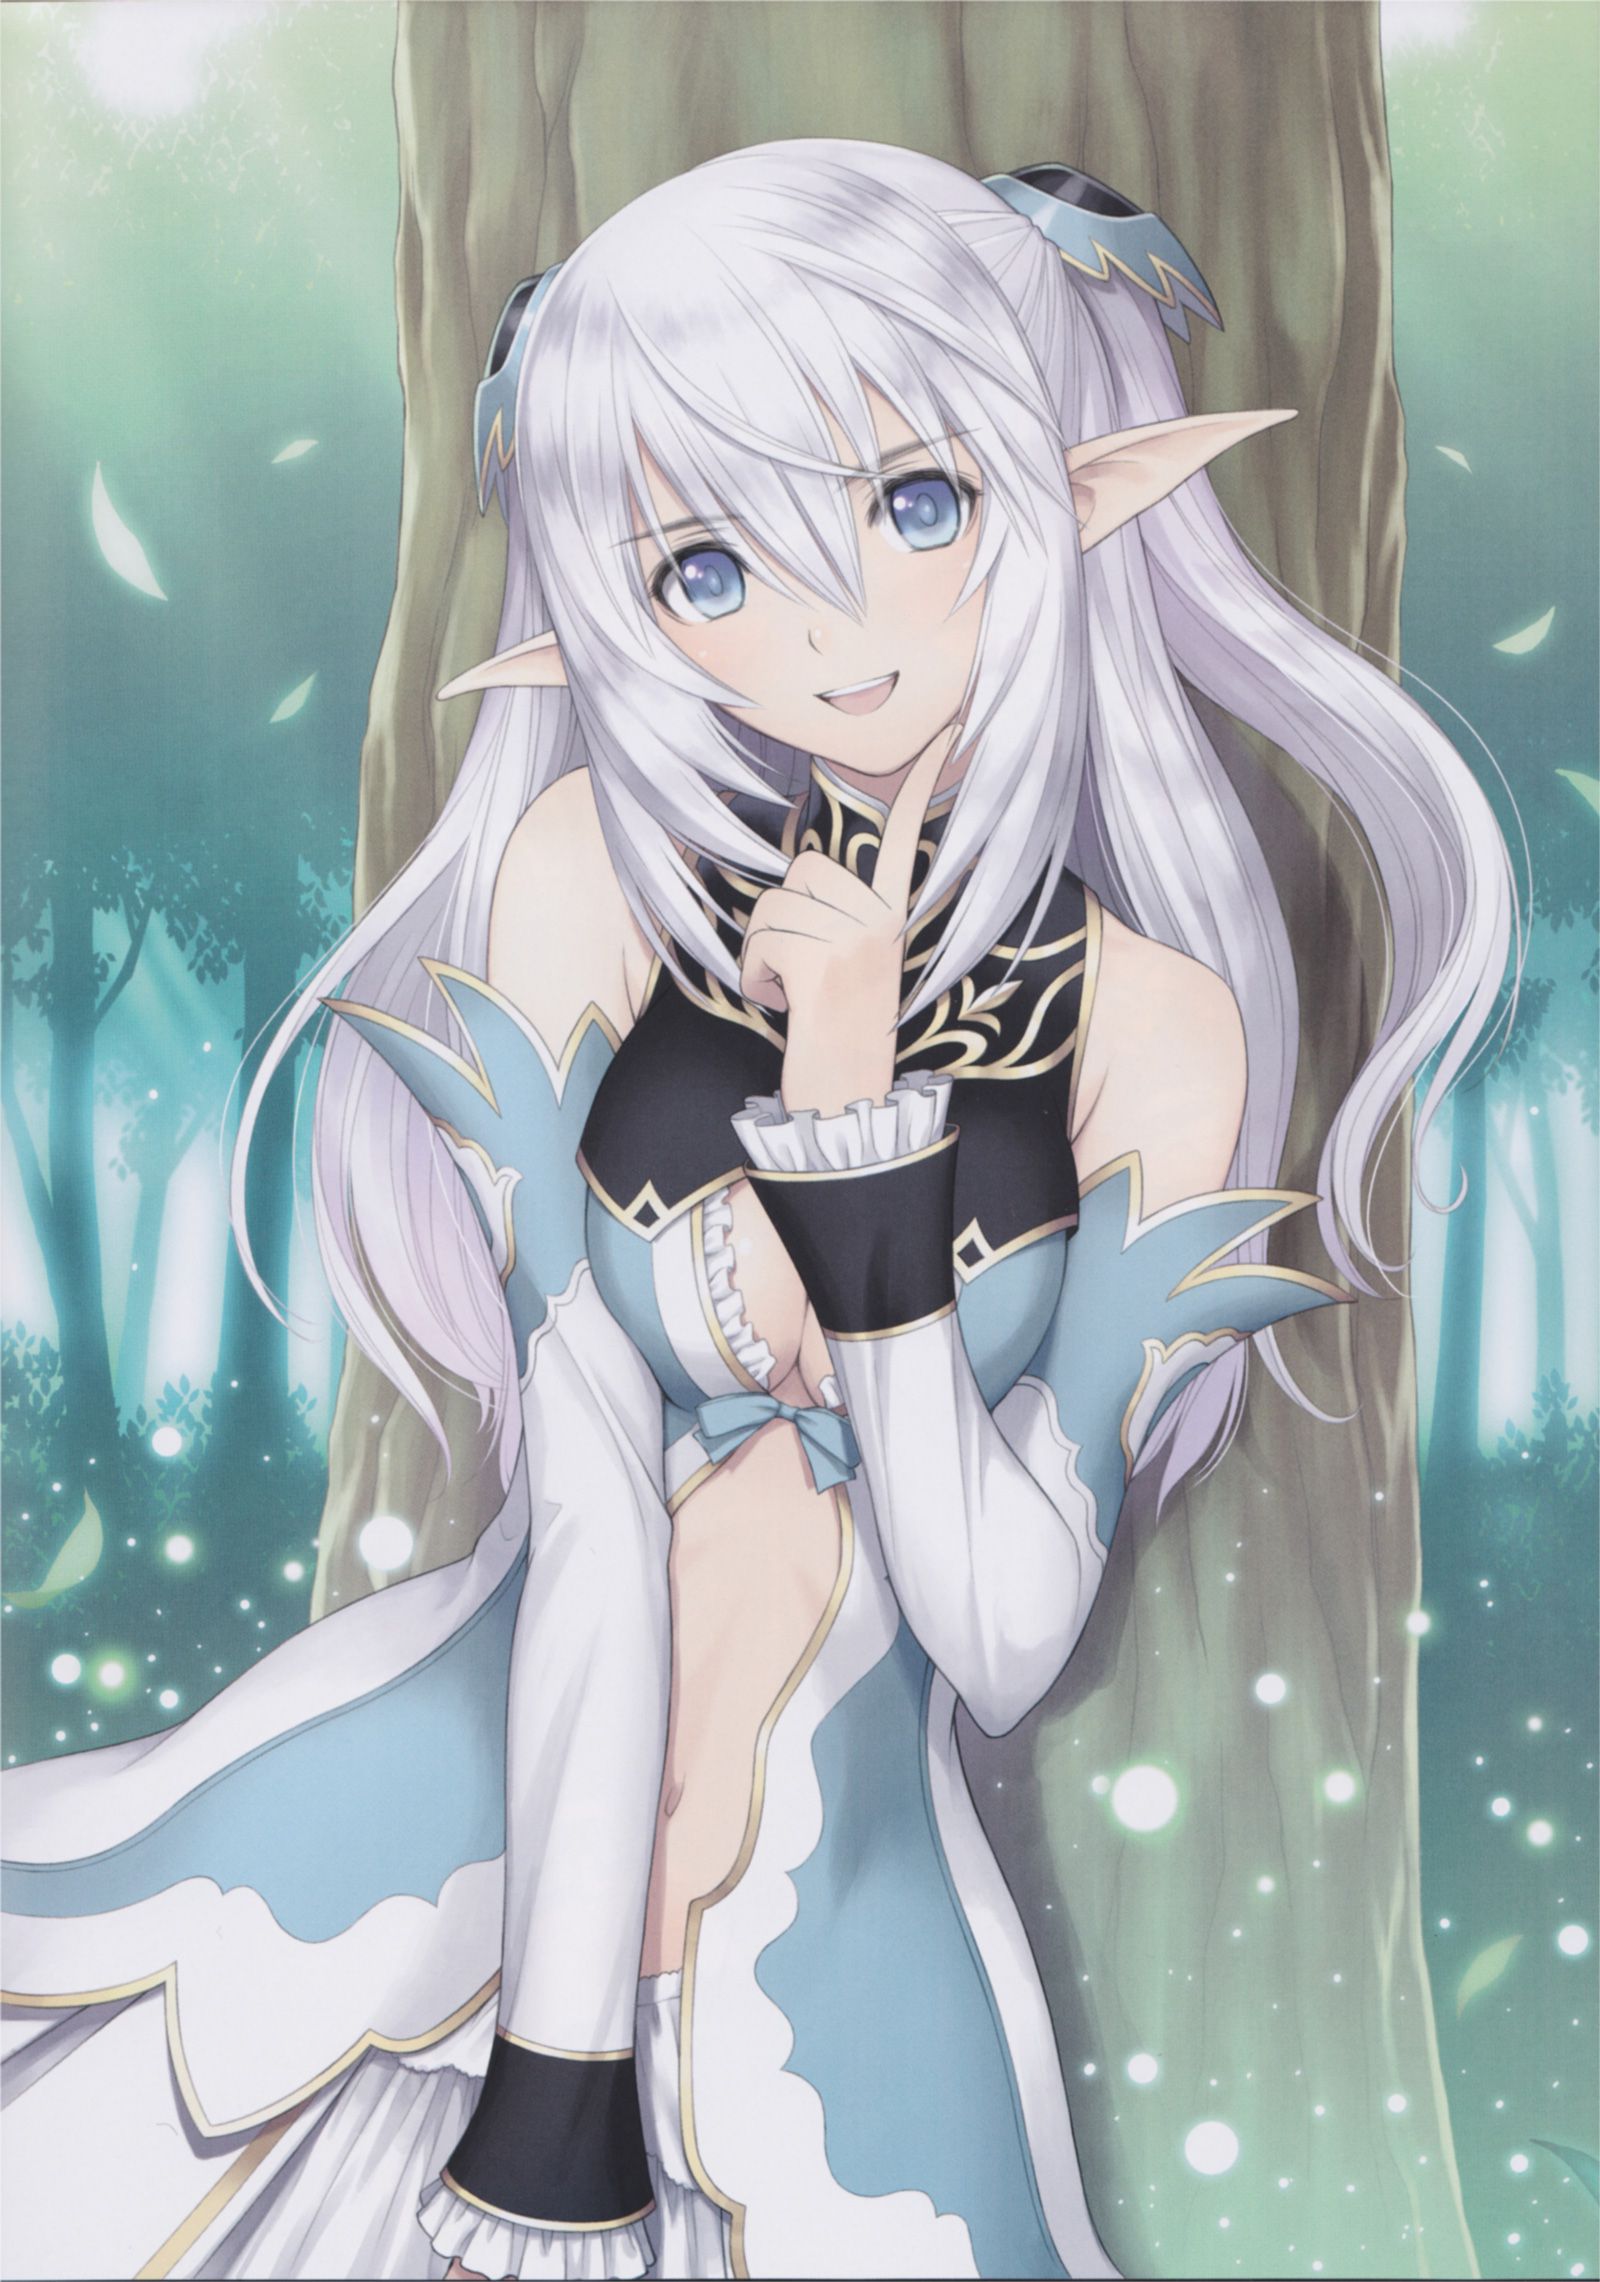 Secondary image of a silver-haired girl that 4 50 photos [Ero/non-erotic] 14